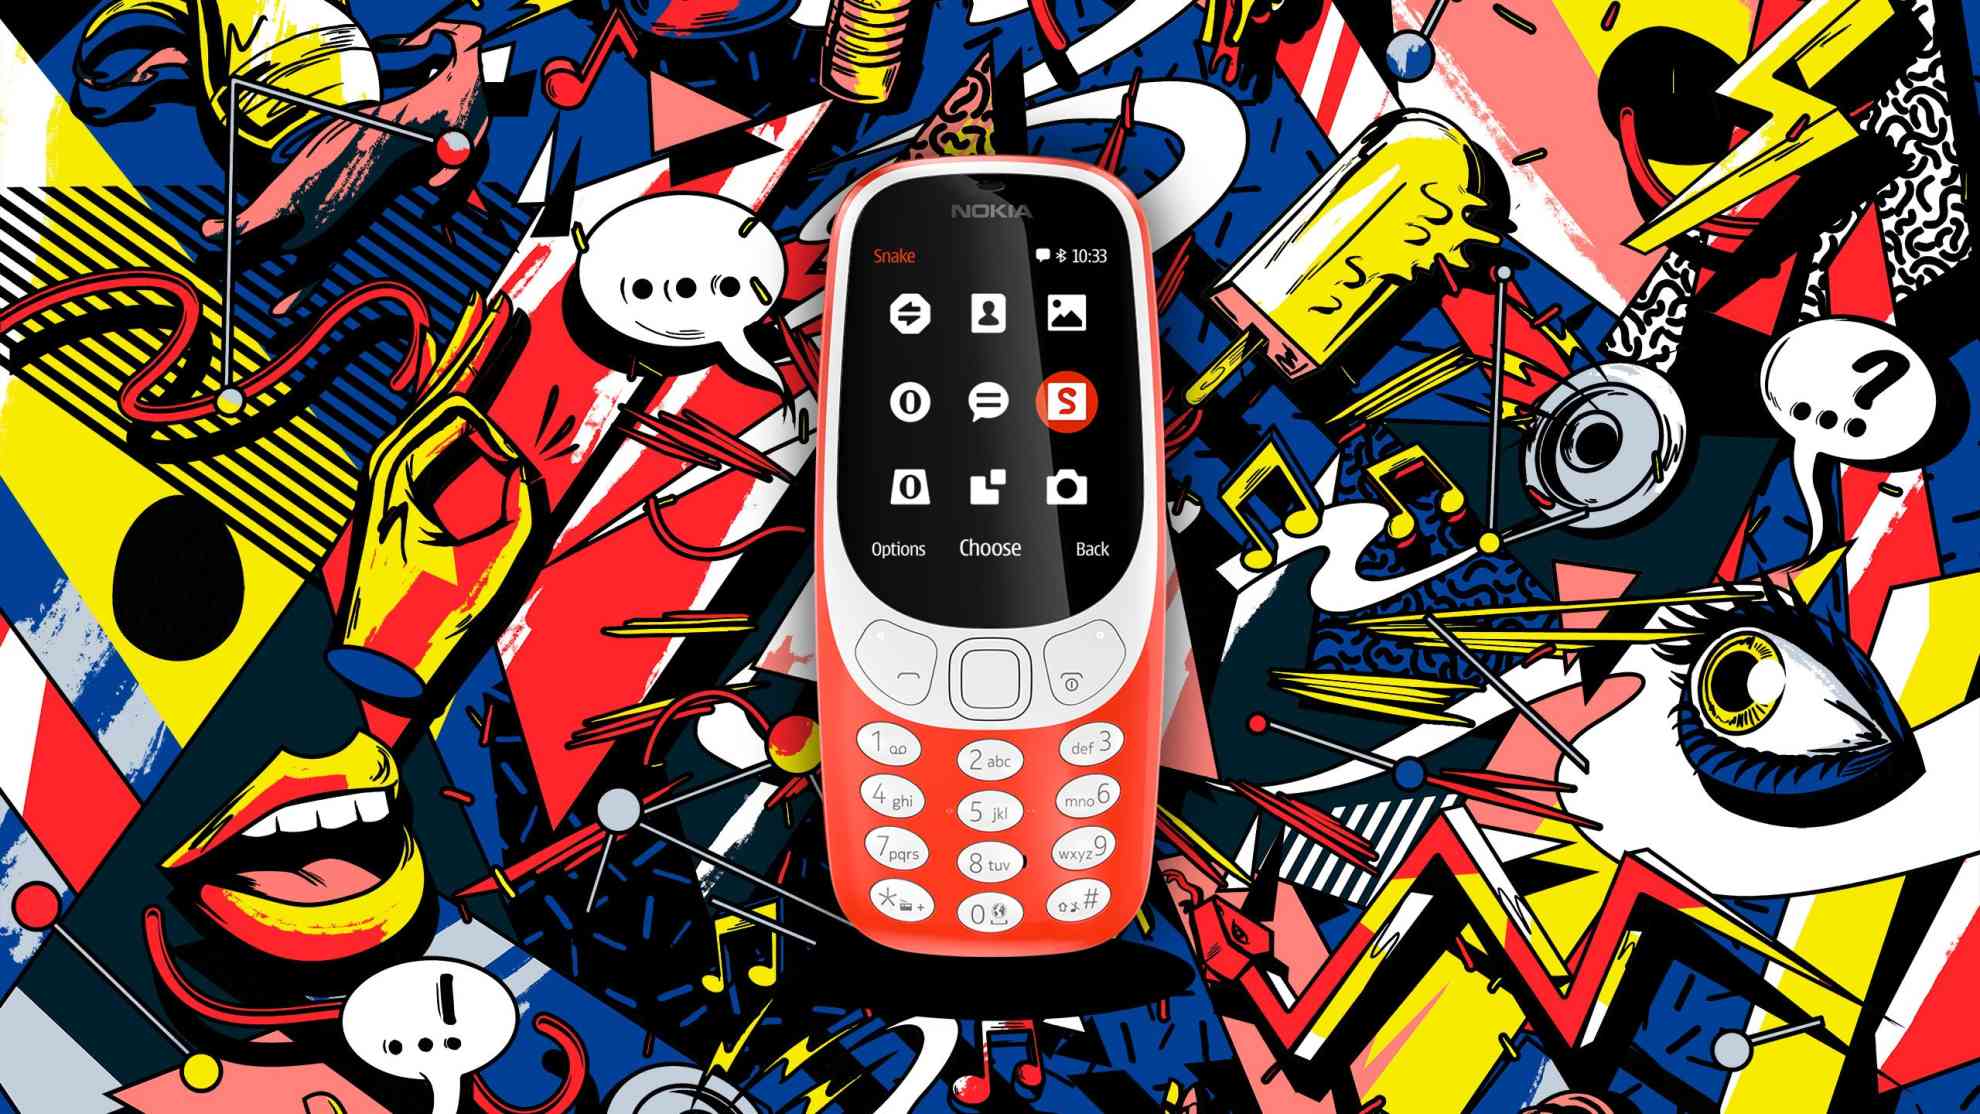 MWC 2017 The Legendary Nokia 3310 Is Launched With Month Long